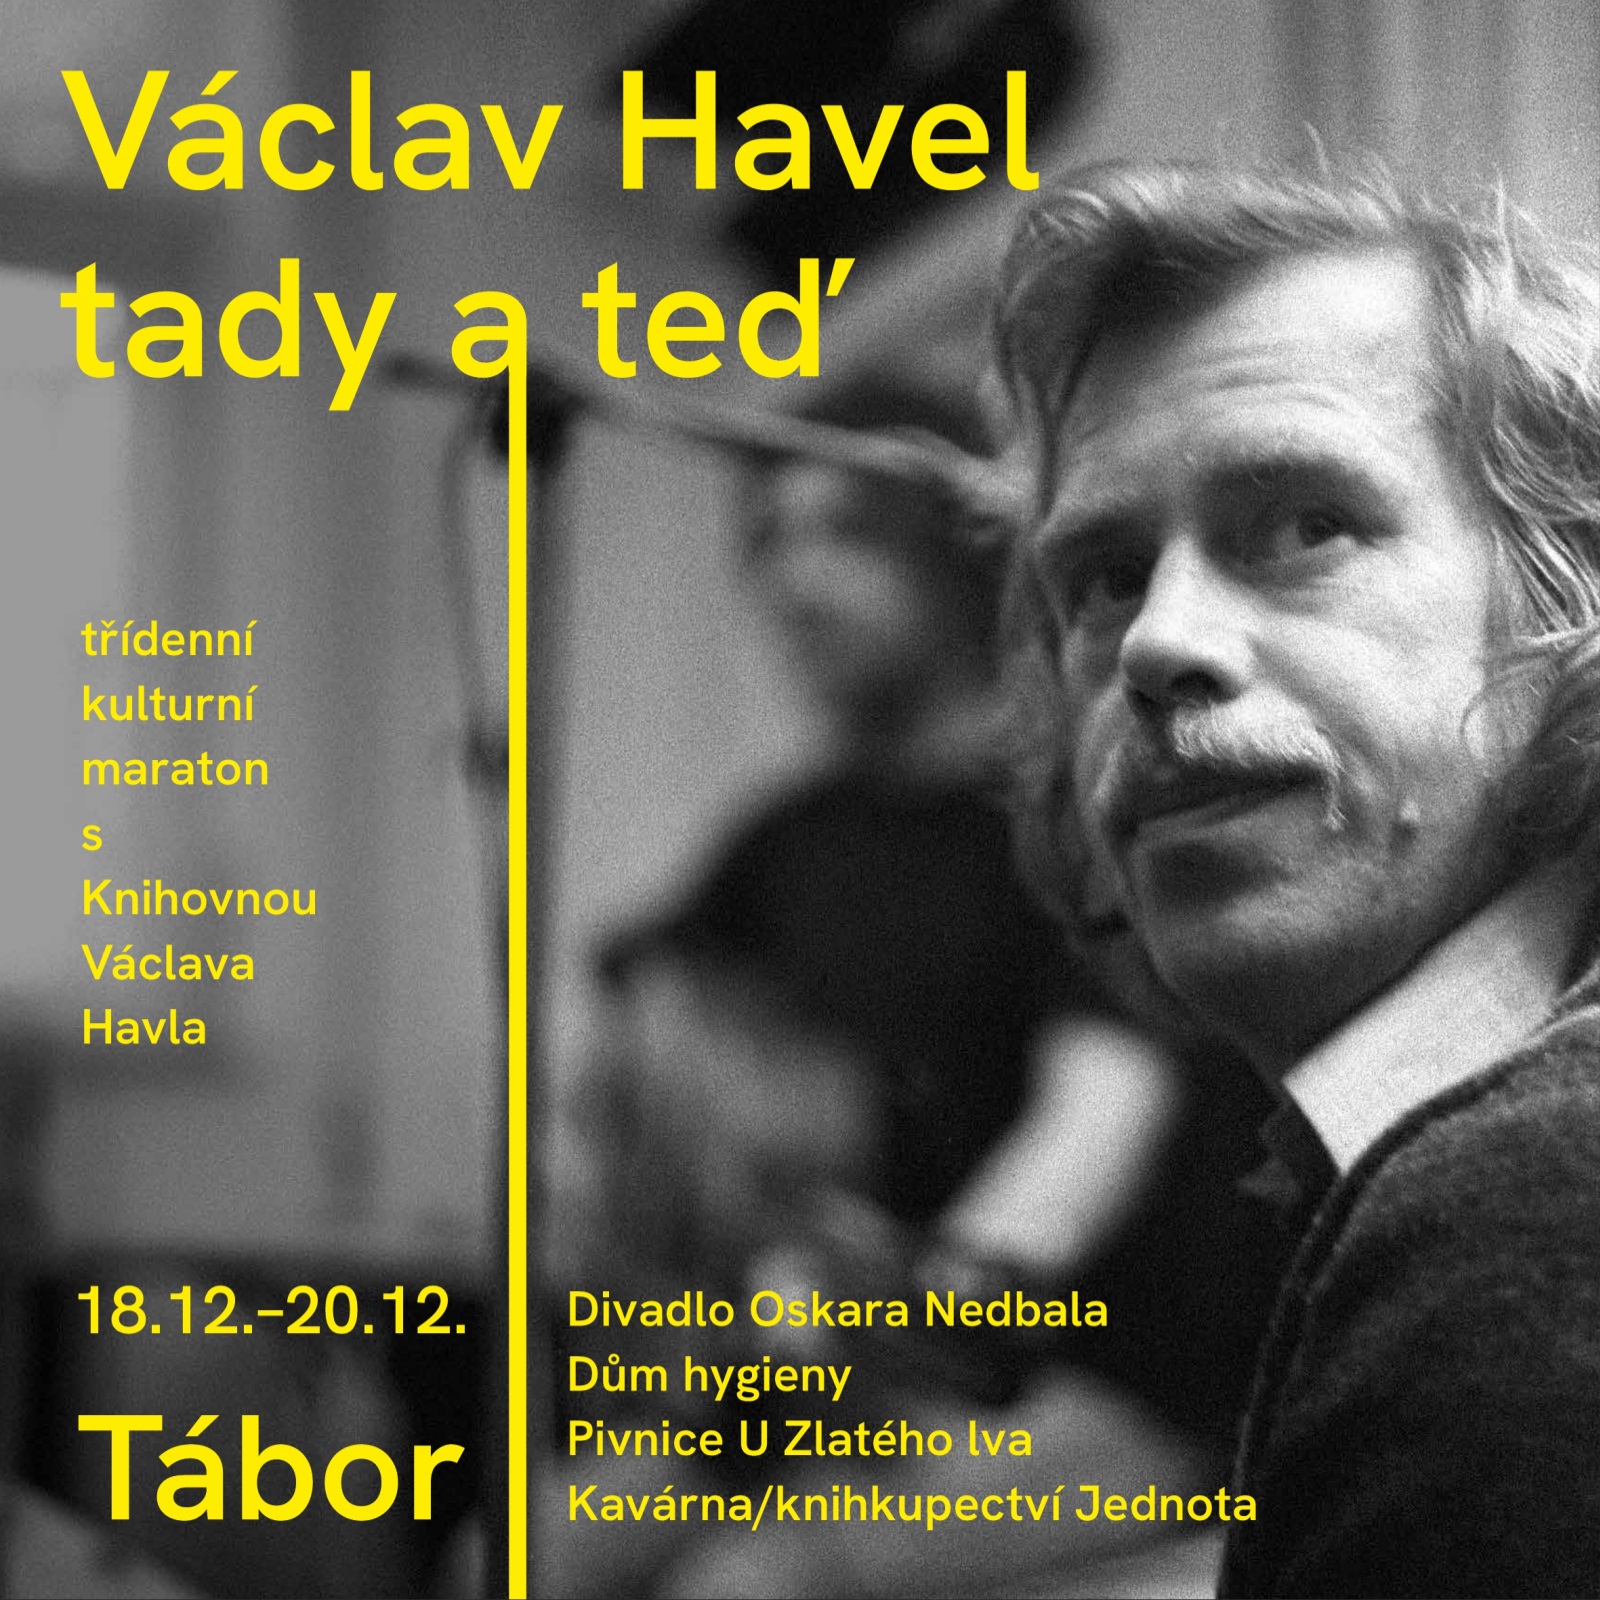 Václav Havel Here and Now: Three Days with the VH Library in Tábor